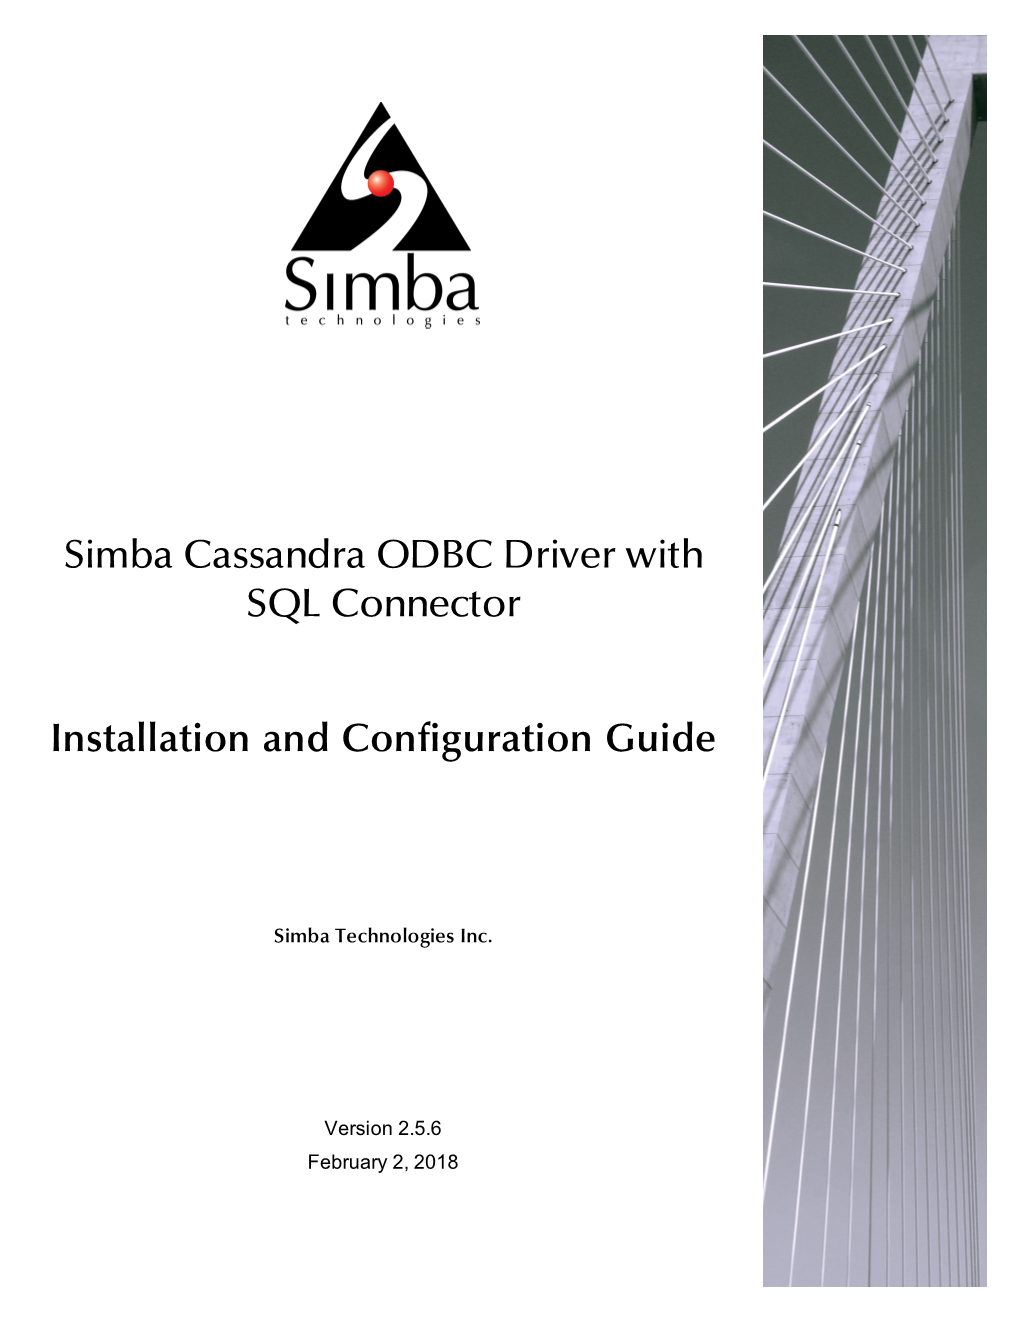 Simba Cassandra ODBC Driver with SQL Connector Installation And